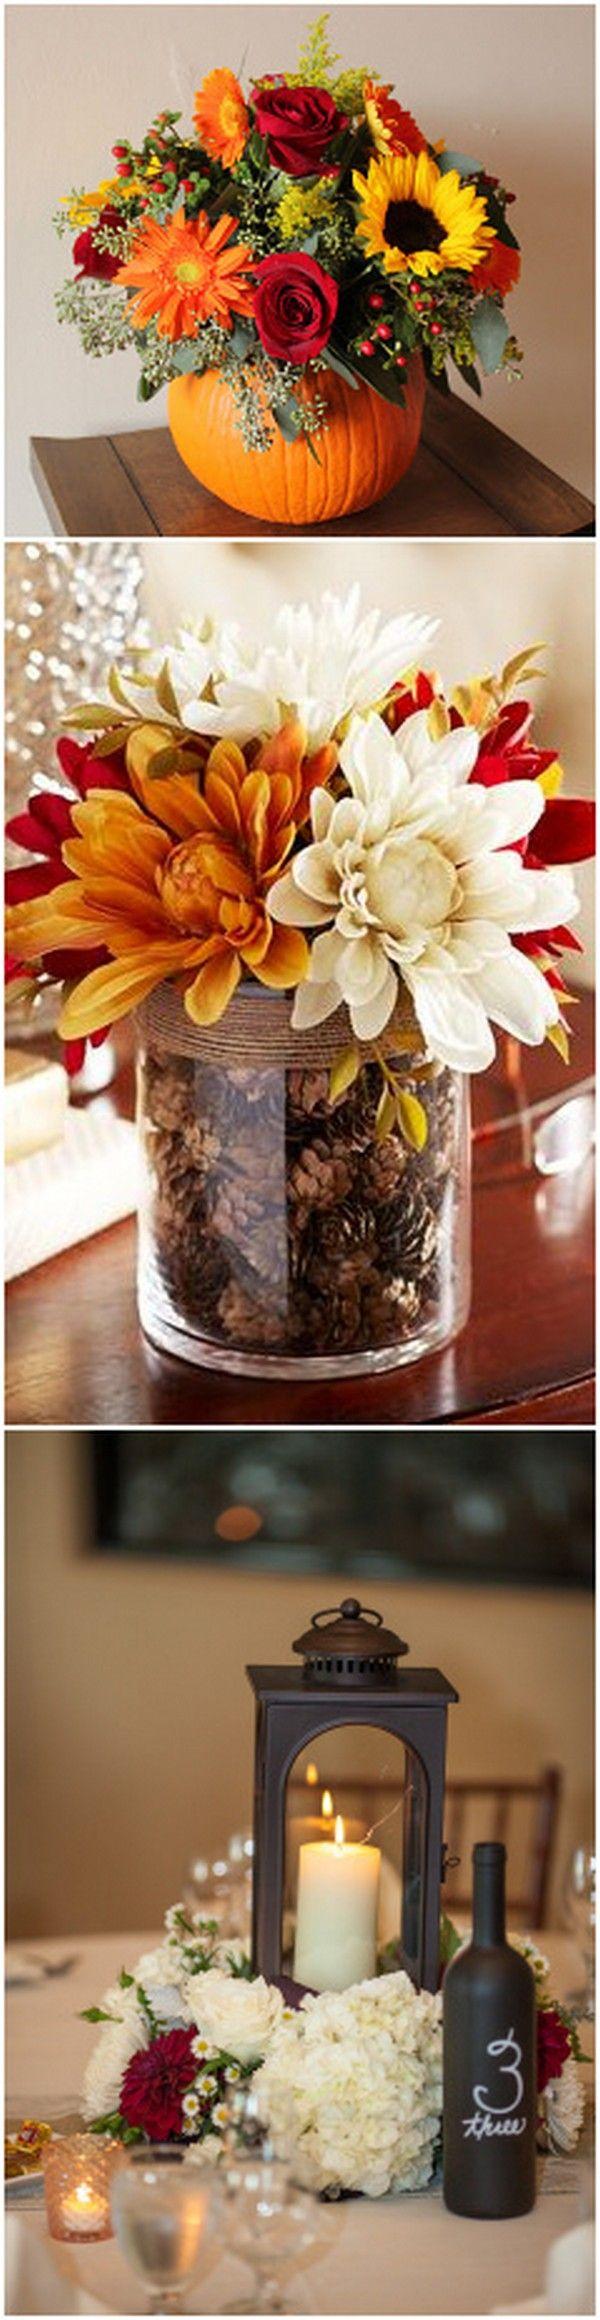 Wedding - 70  Amazing Fall Wedding Ideas For 2017 - Page 2 Of 4